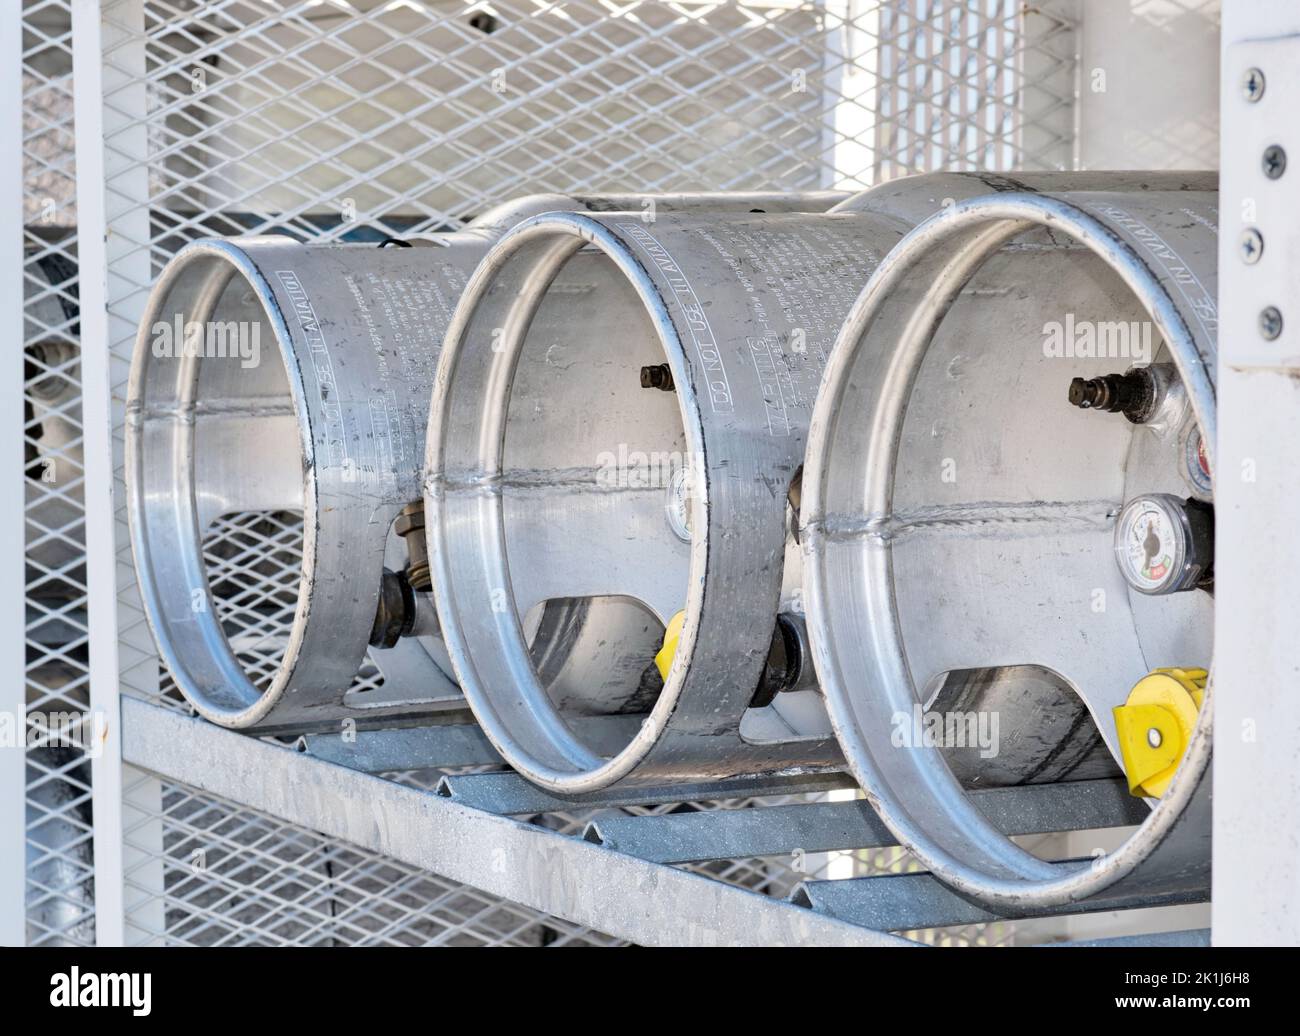 Houston, Texas USA 09-18-2022: Three Liquid Petroleum gas cylinders stored horizontally in a metal safety cage, eye level angle view with door open. Stock Photo